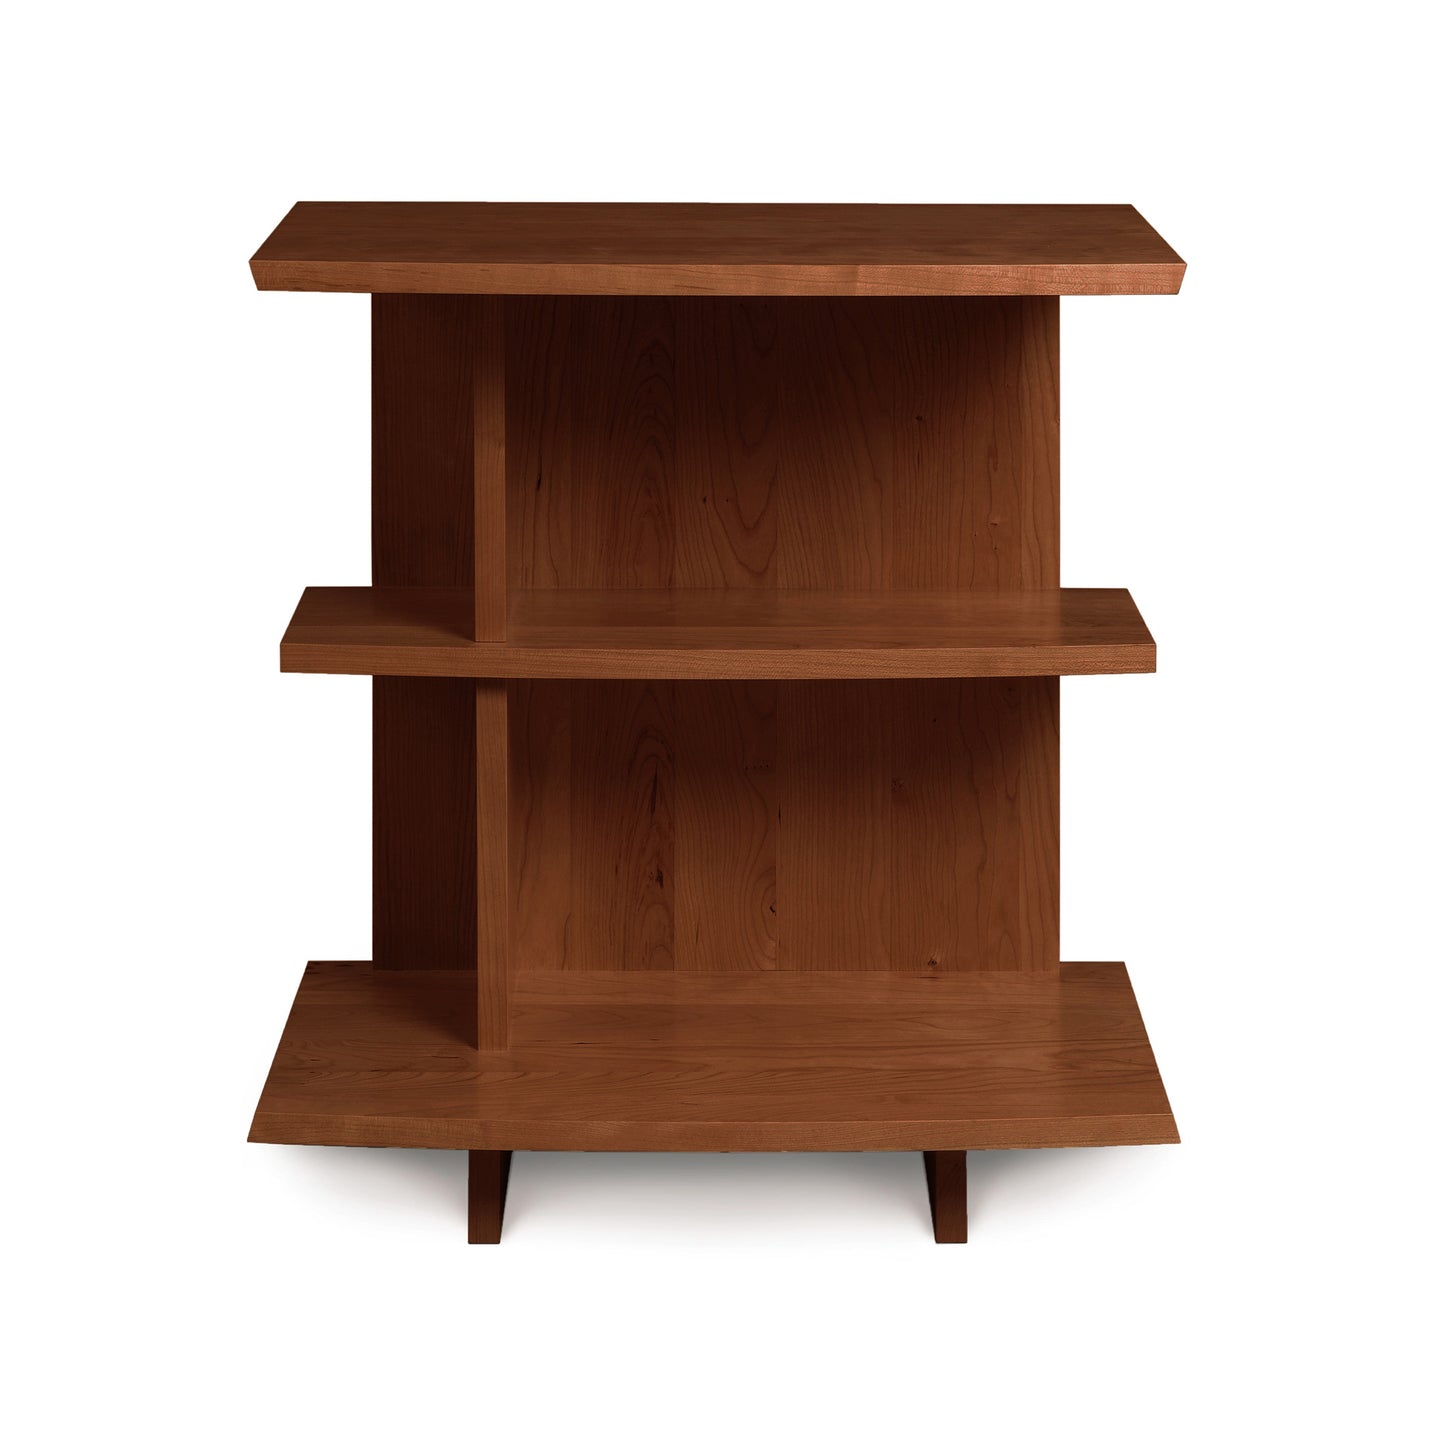 A Berkeley Open Shelf Nightstand - Left with an asymmetrical design, isolated on a white background.